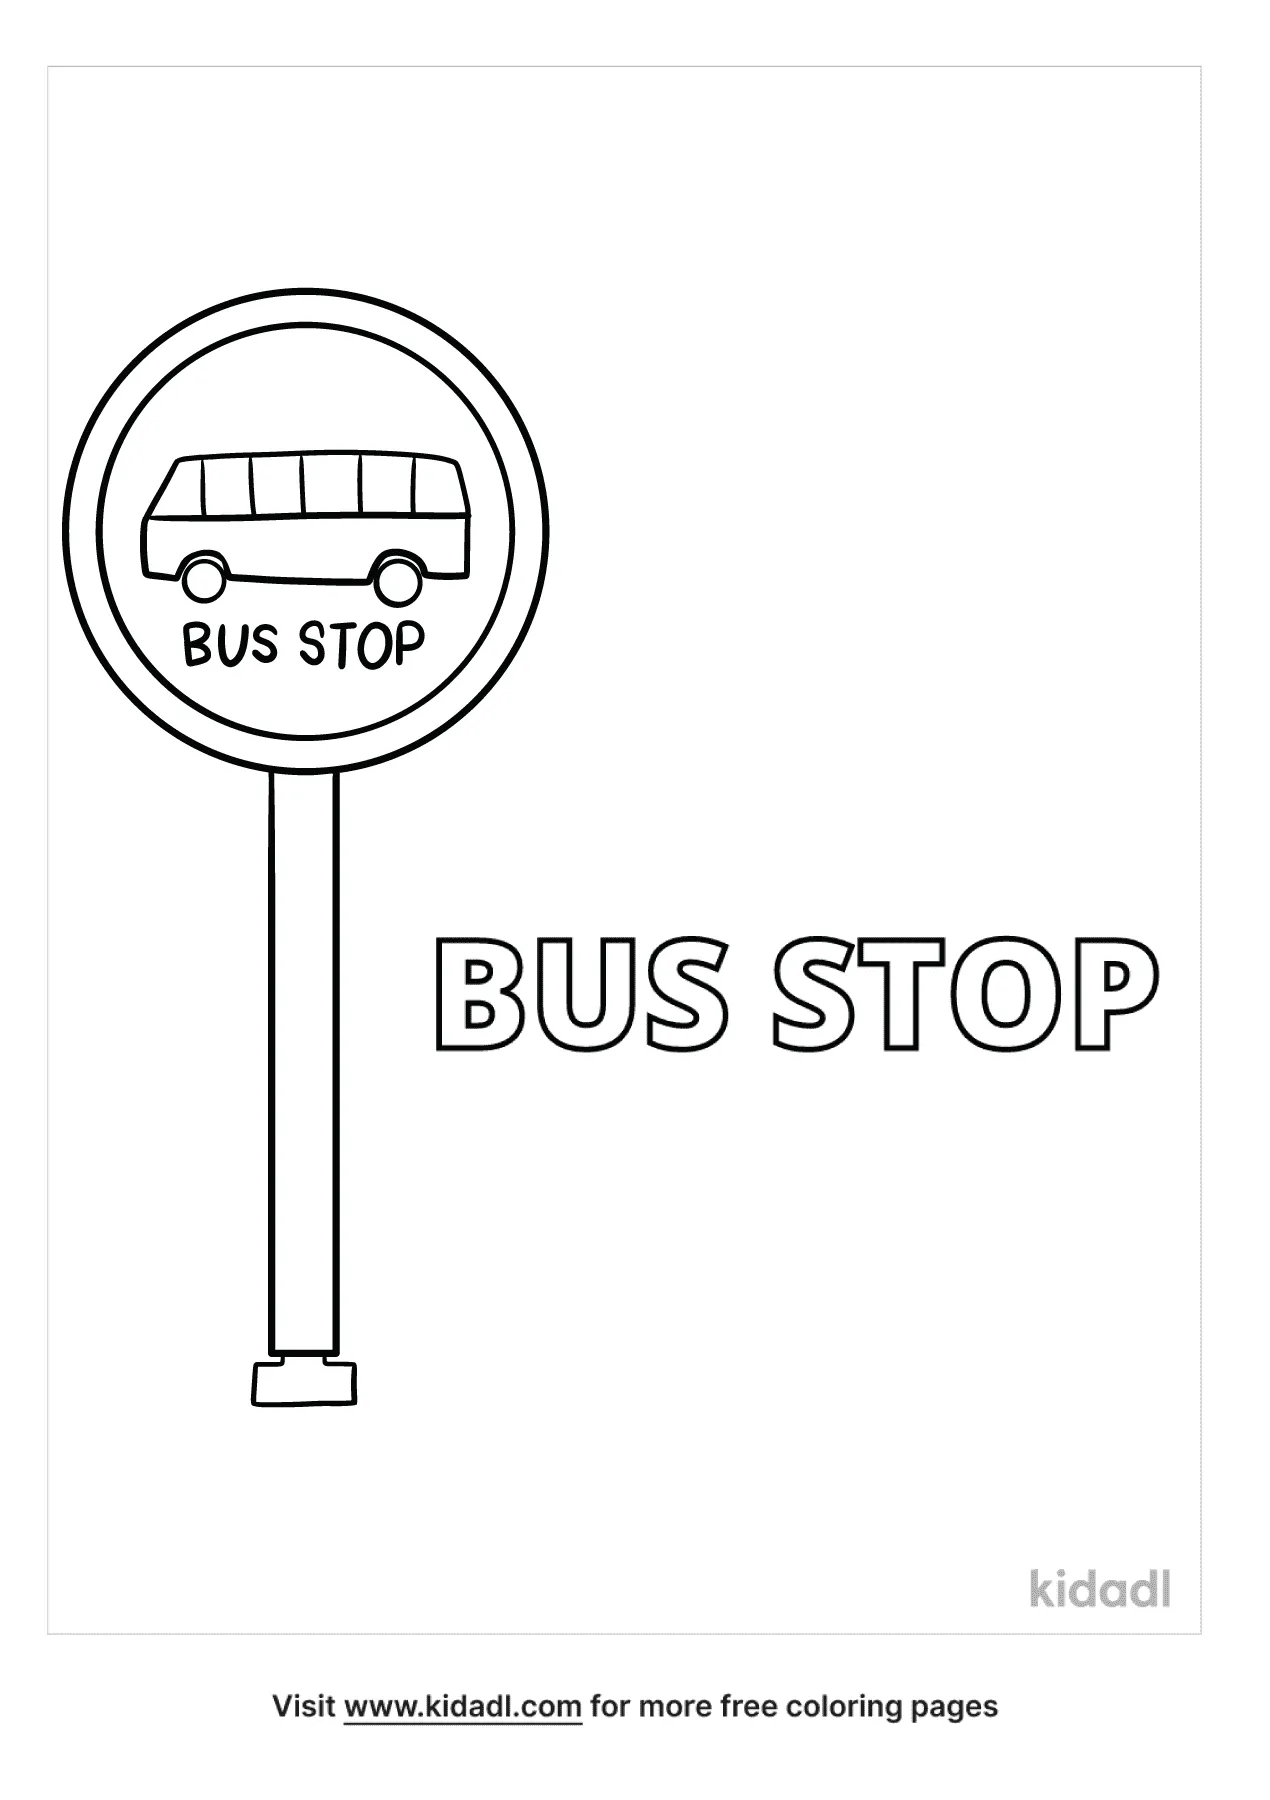 Free bus stop sign coloring page coloring page printables